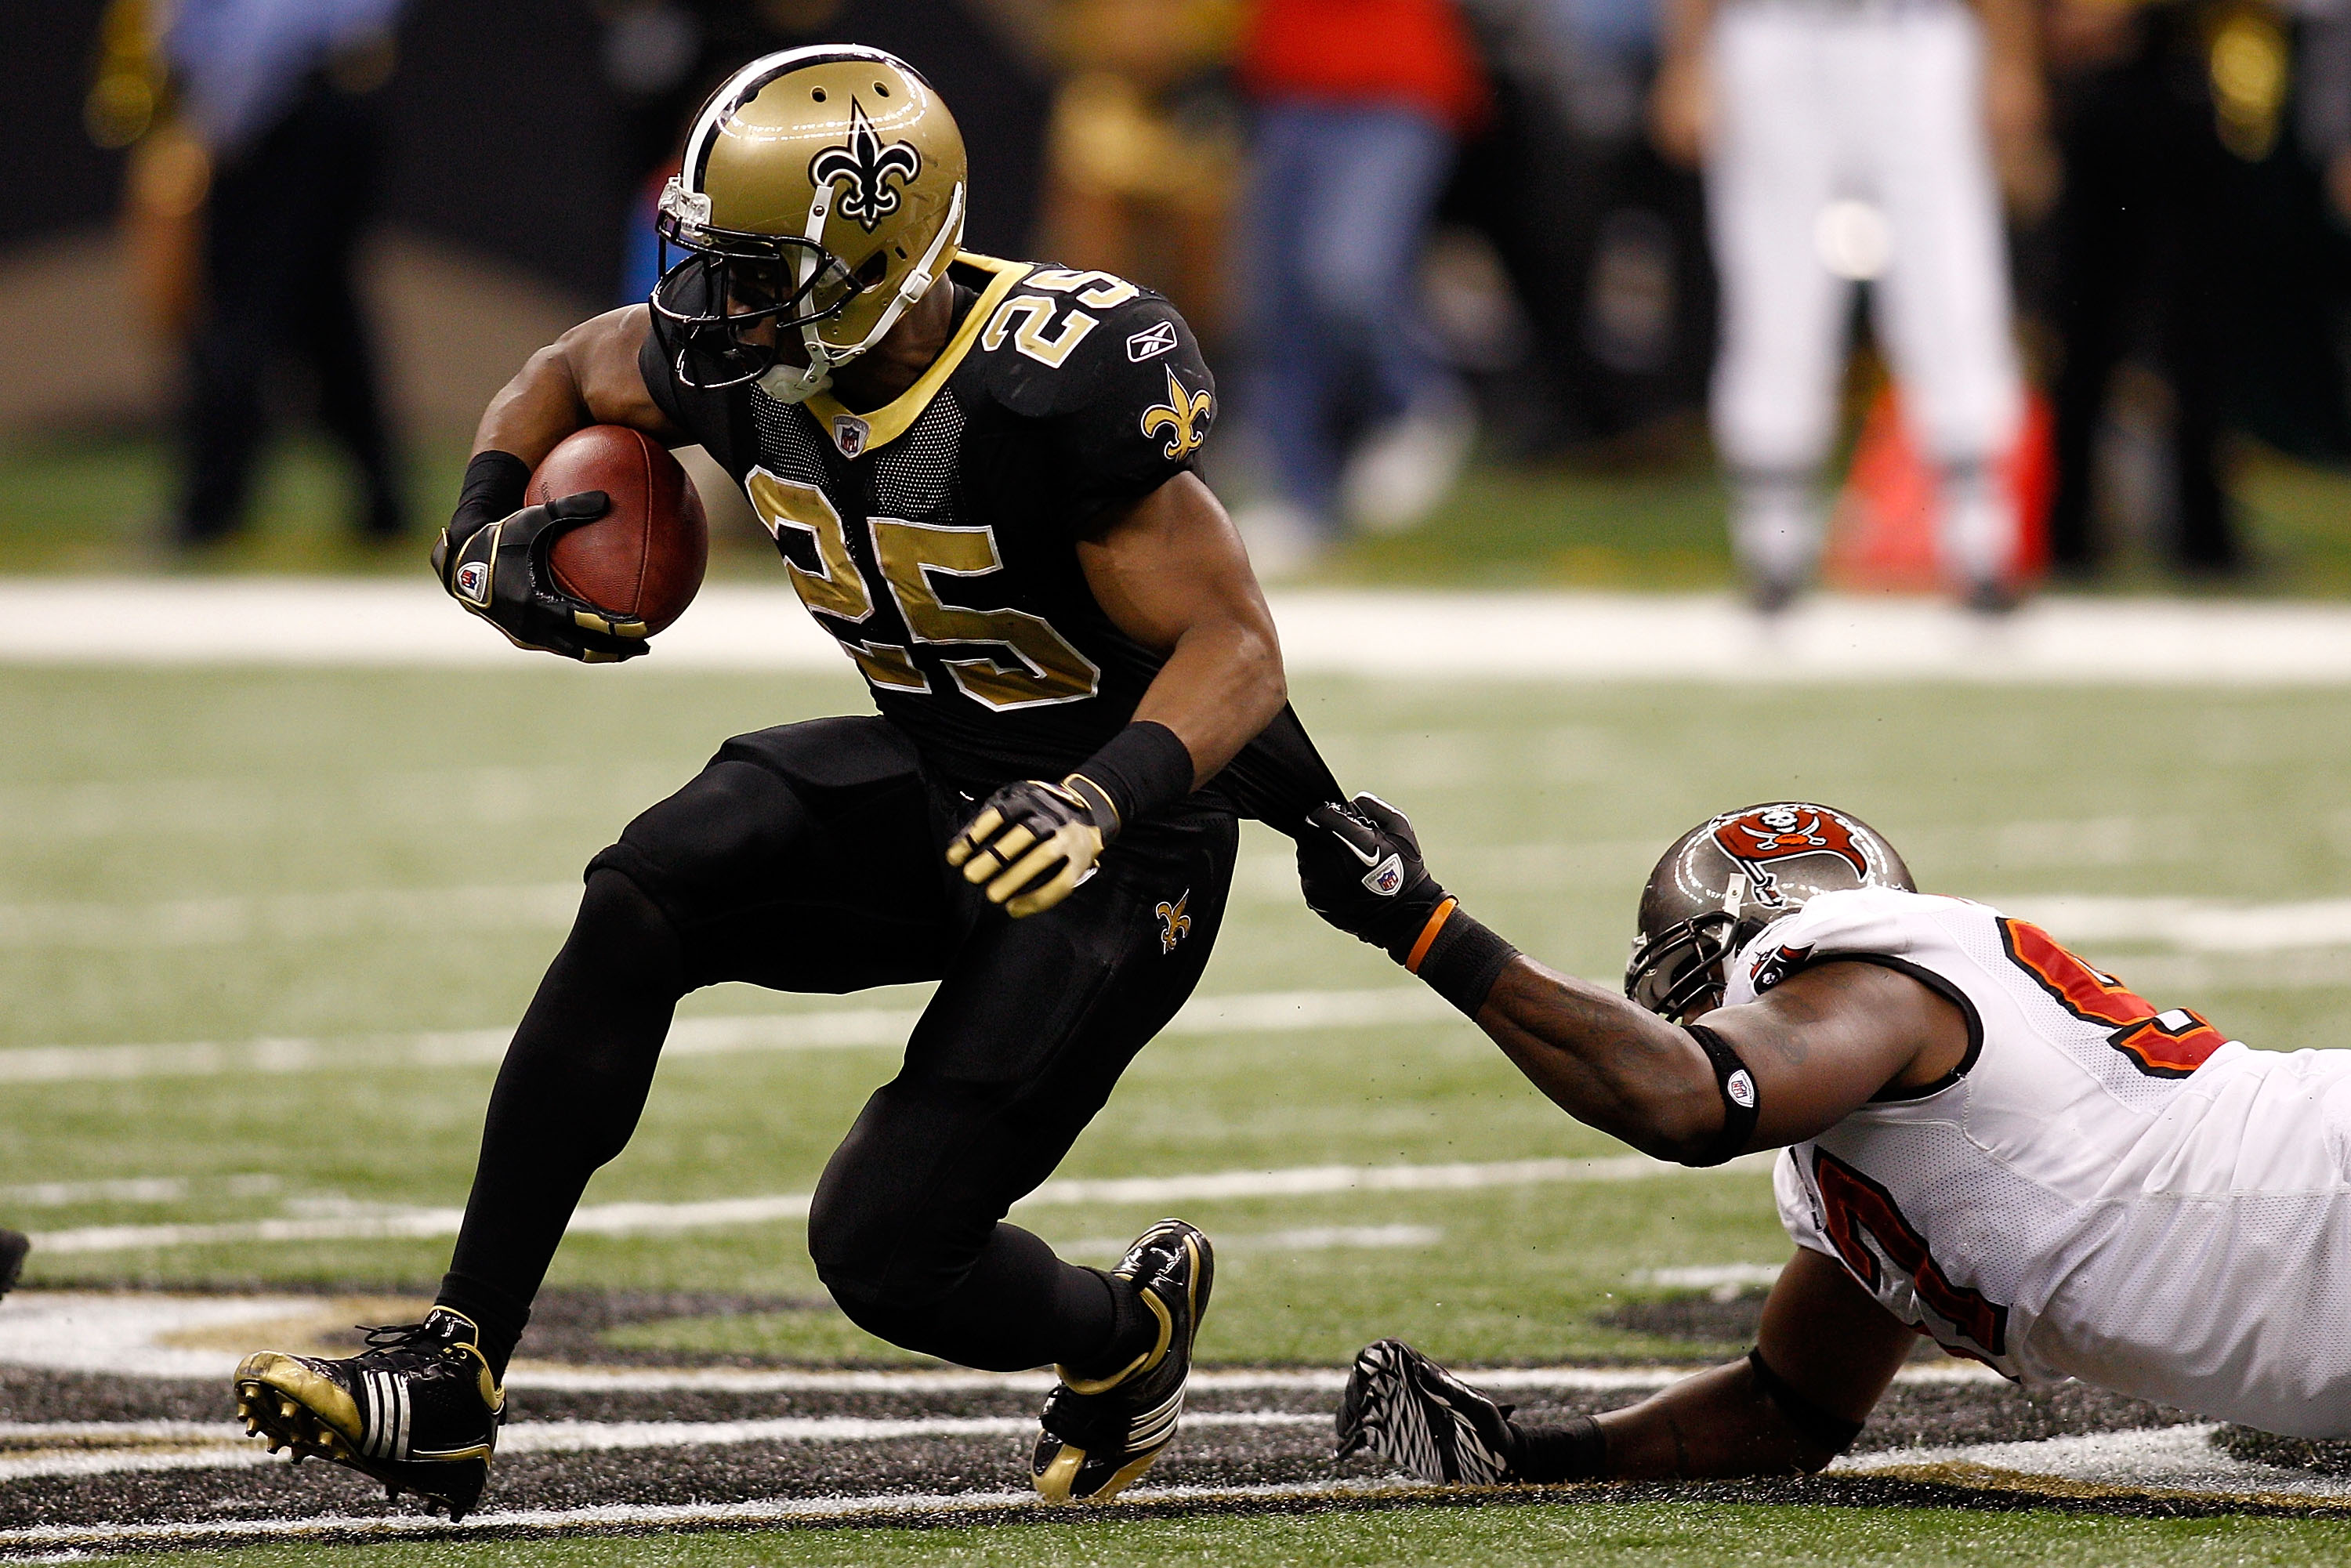 NEW ORLEANS, LA - JANUARY 02:  Reggie Bush #25  of the New Orleans Saints is tackled by Alex Magee #97 of the Tampa Bay Buccaneers at the Louisiana Superdome on January 2, 2011 in New Orleans, Louisiana.   The Buccaneers defeated the Saints 23-13.  (Photo